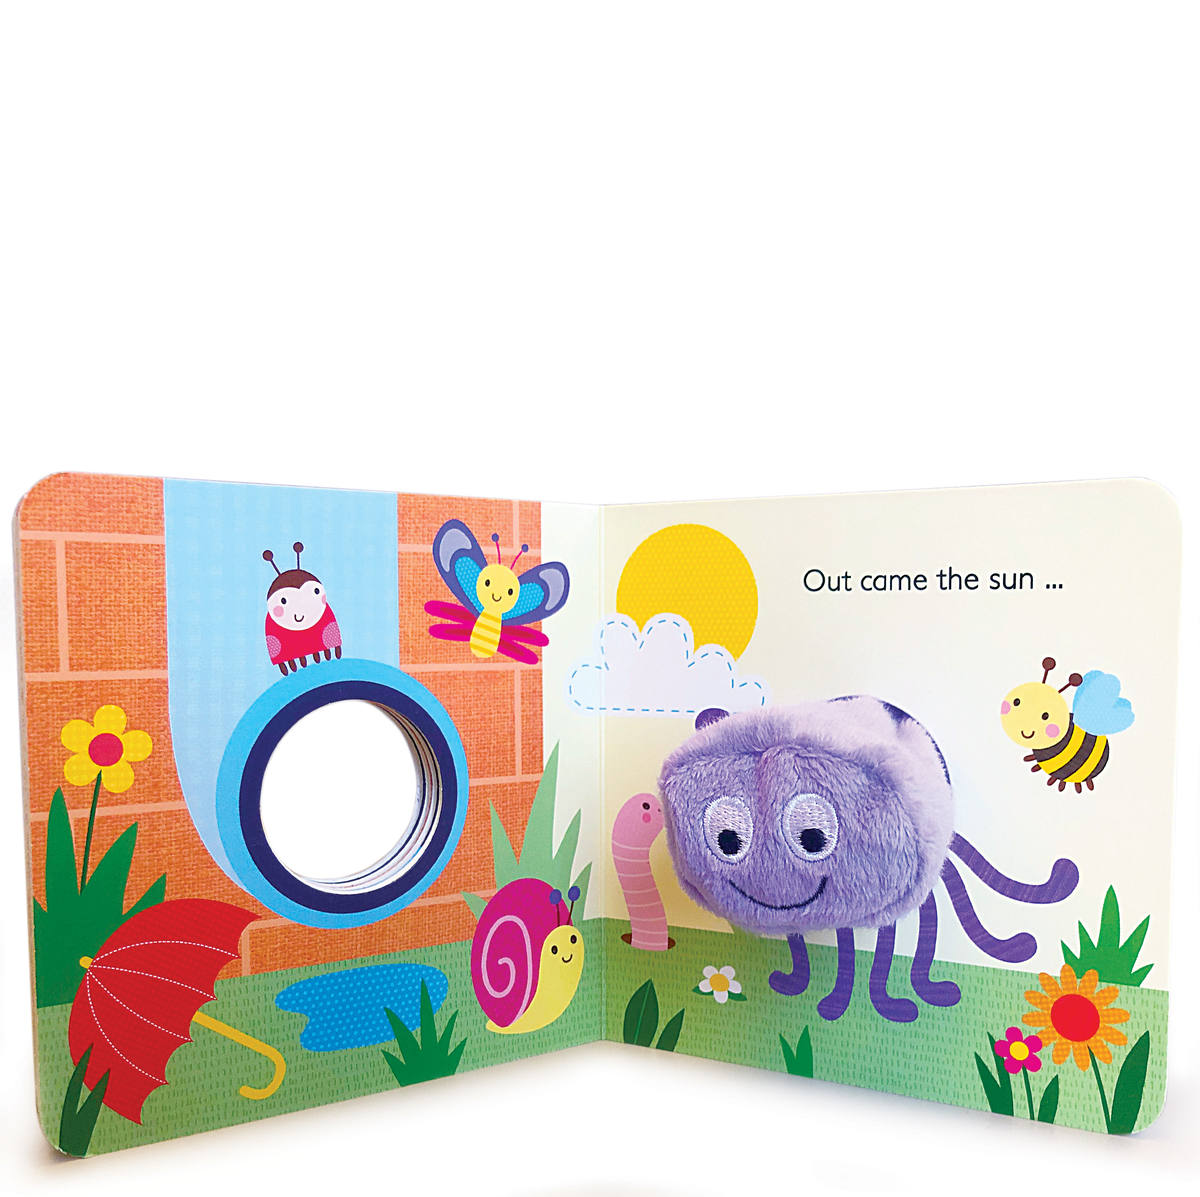 Itsy Bitsy Spider Finger Puppet Board Book